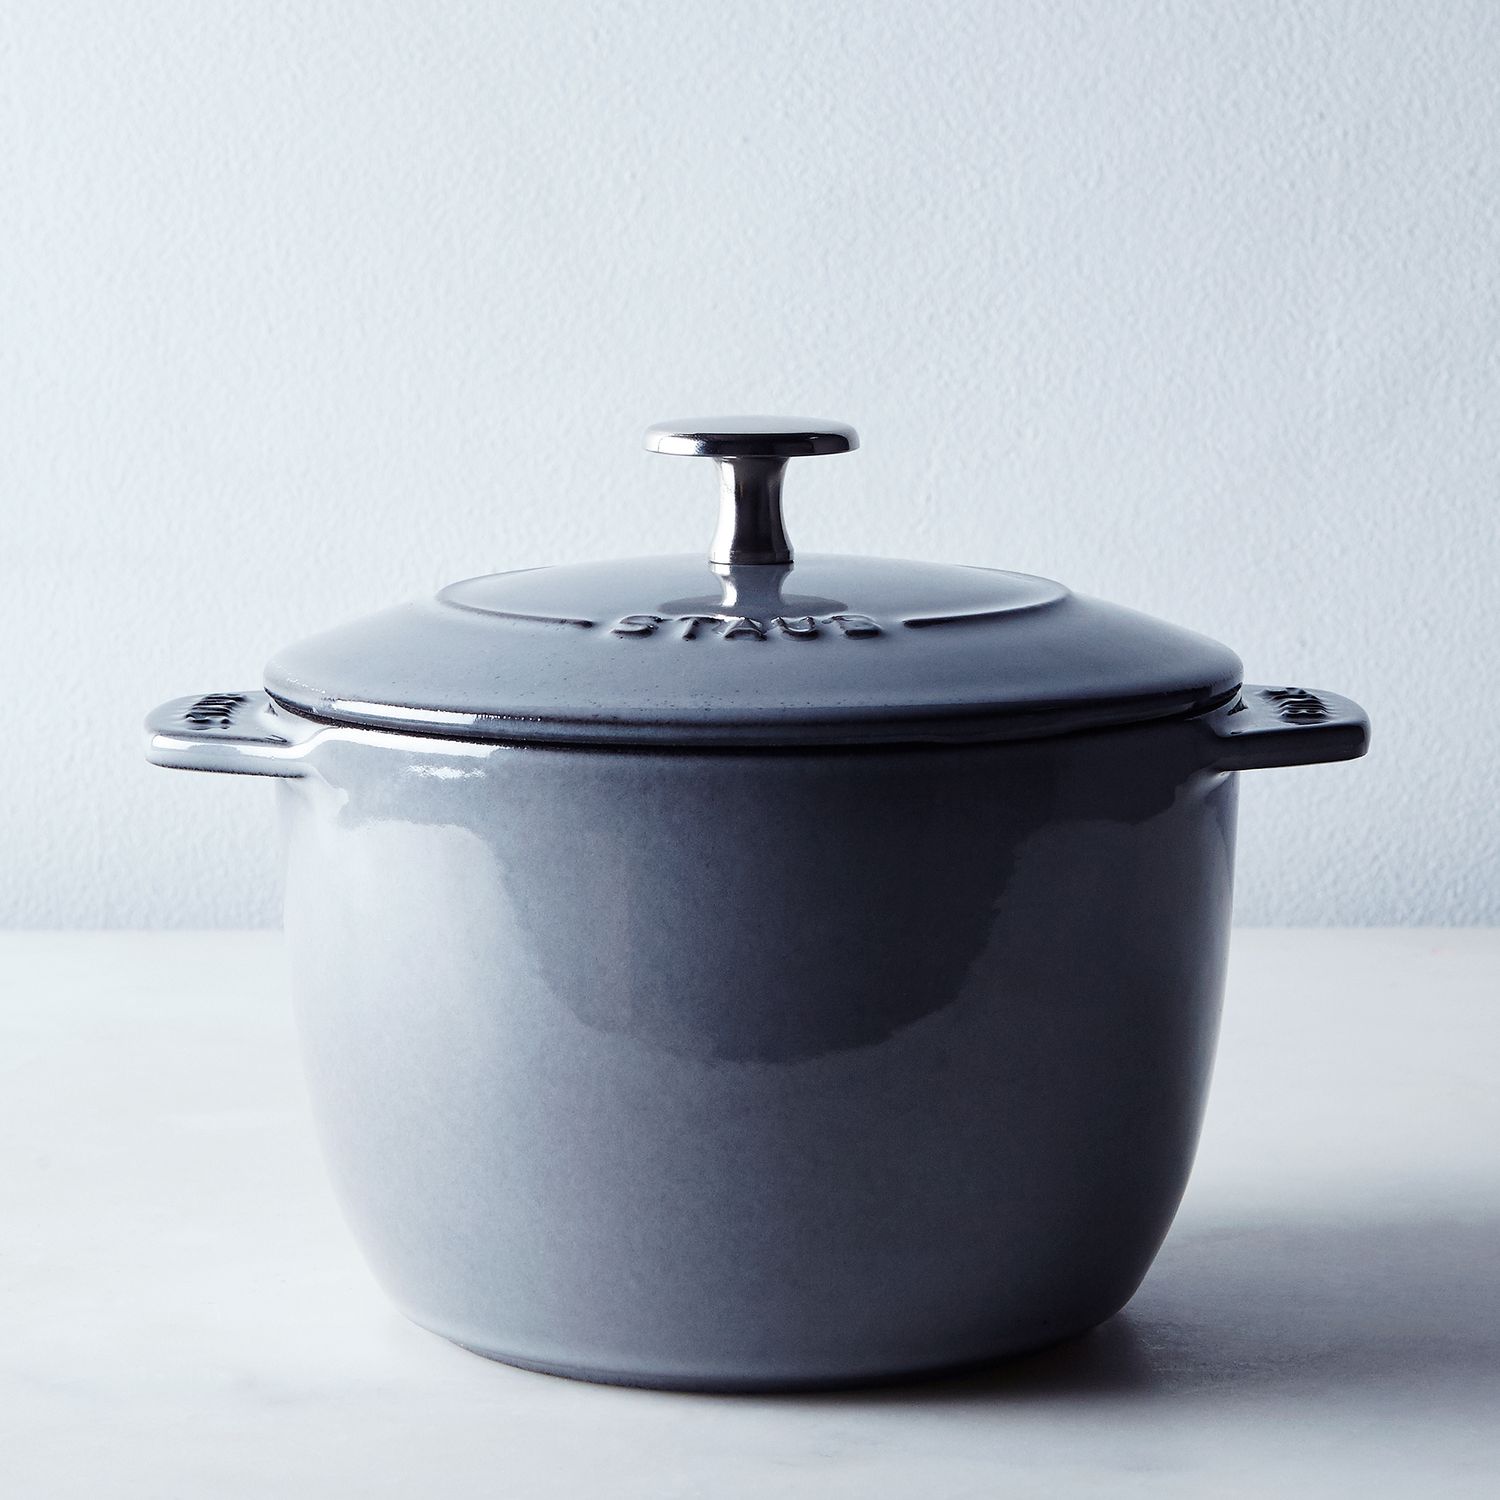 Staub's small-but-mighty rice cooker combines French and Japanese  engineering